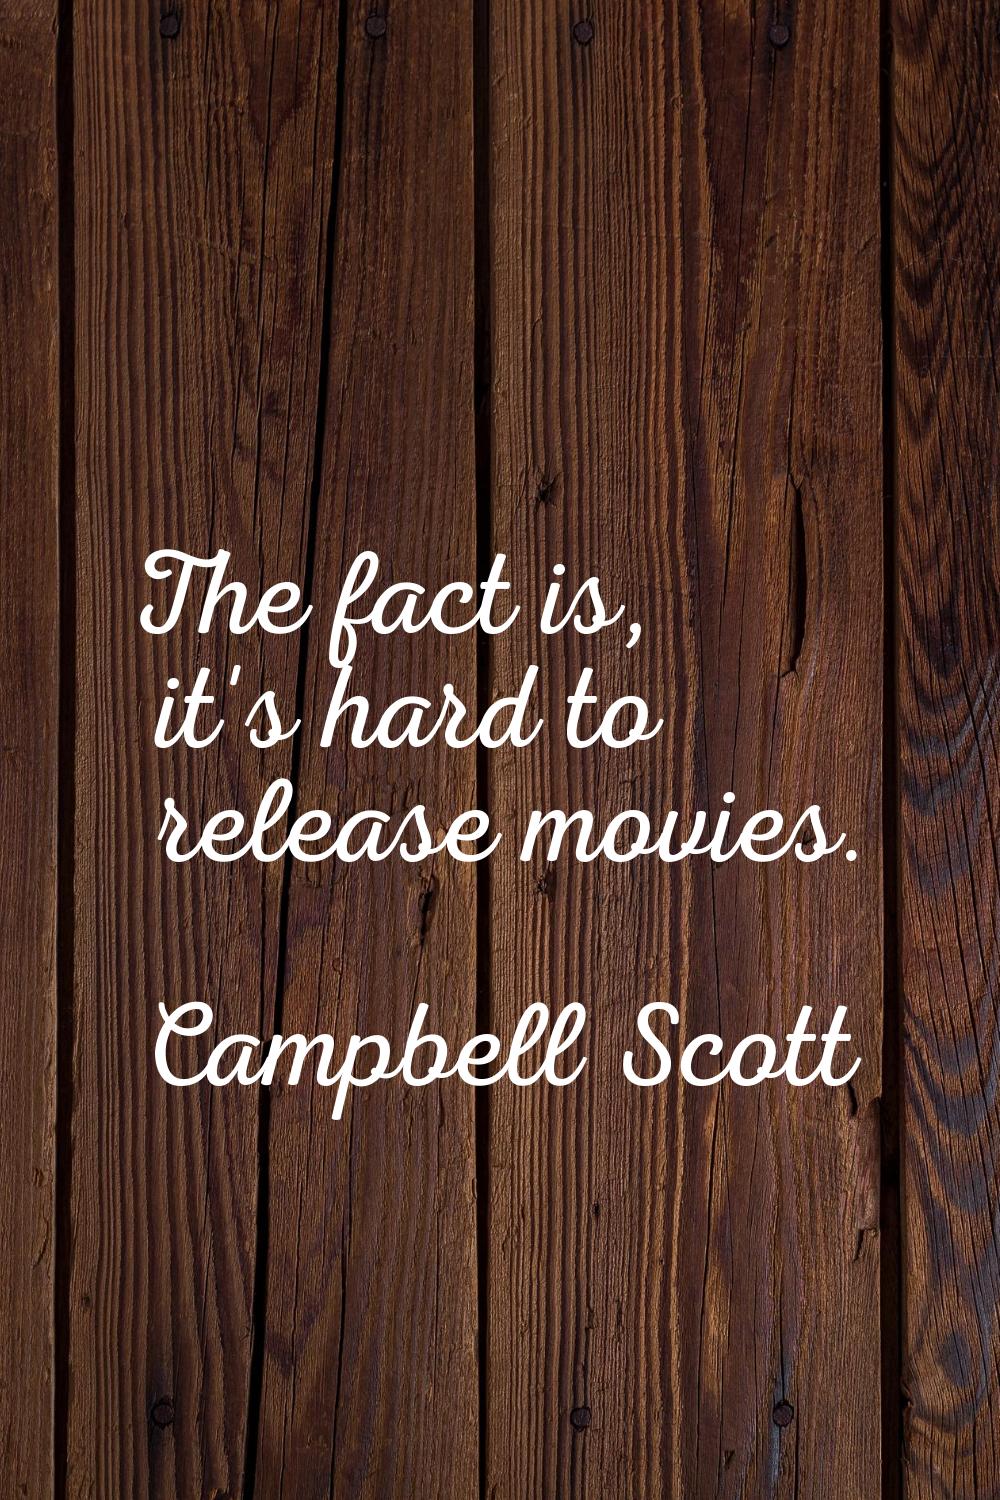 The fact is, it's hard to release movies.